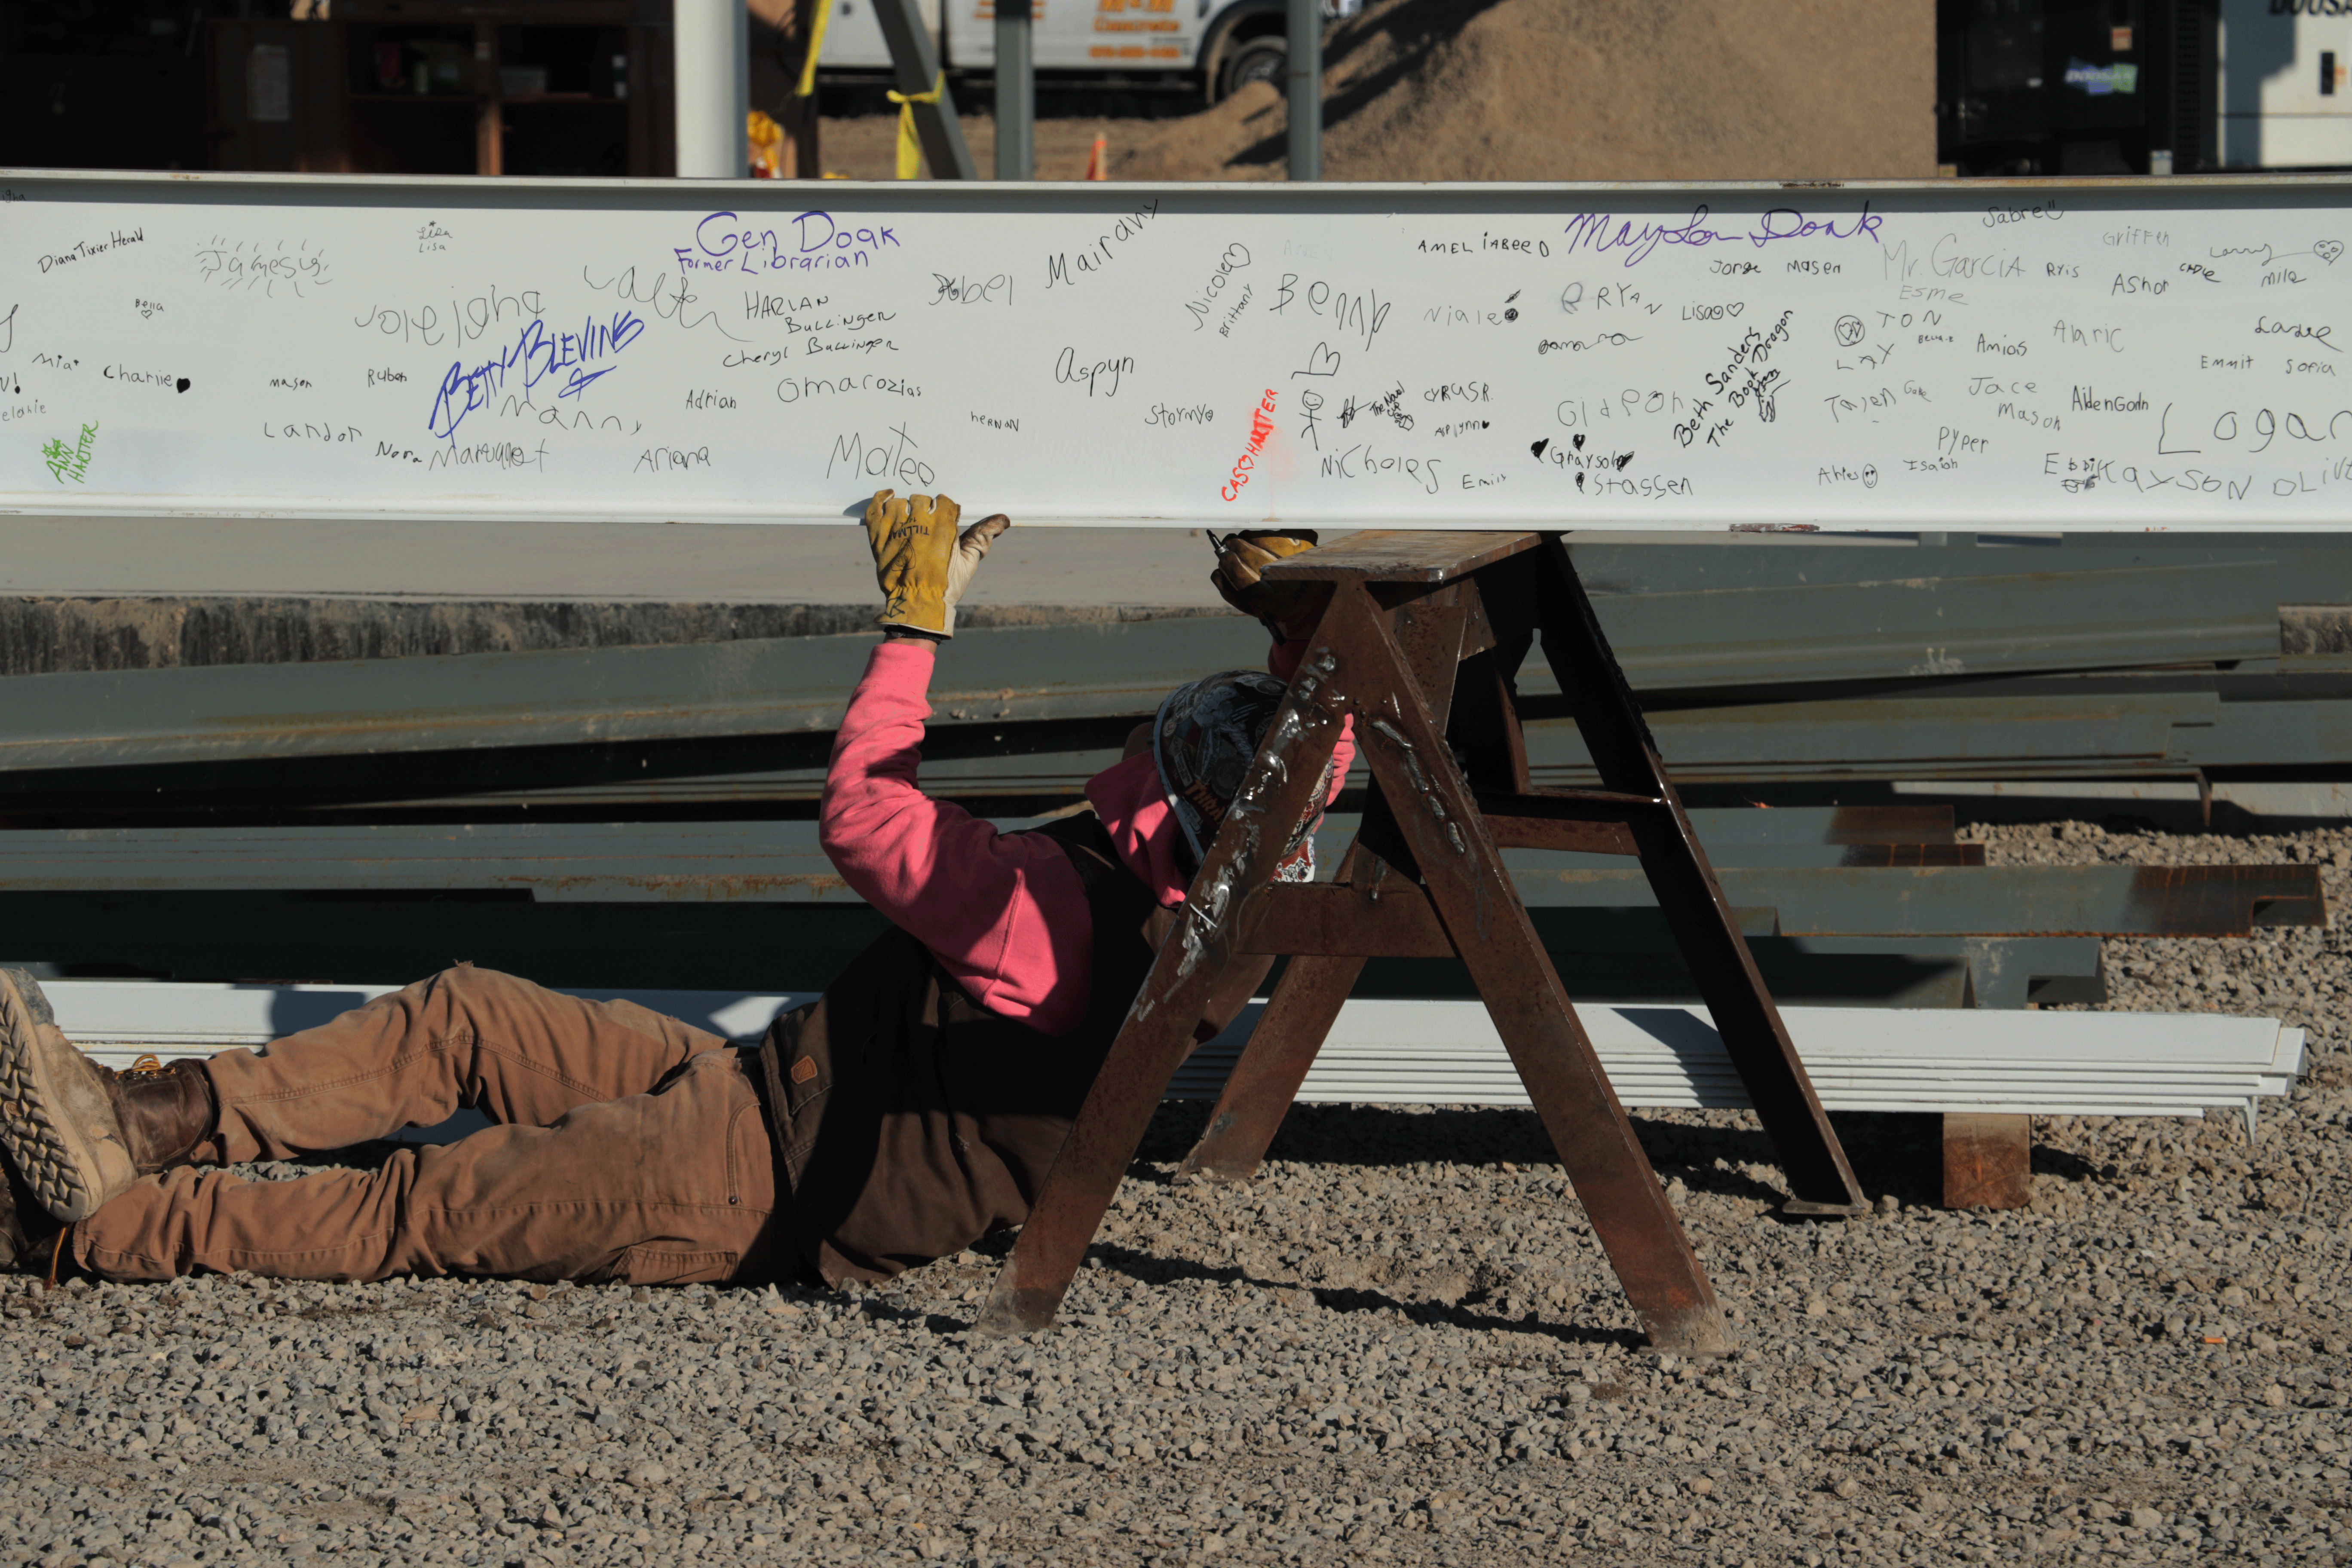 Construction worker signing the bottom of the steel beam at the beam signing